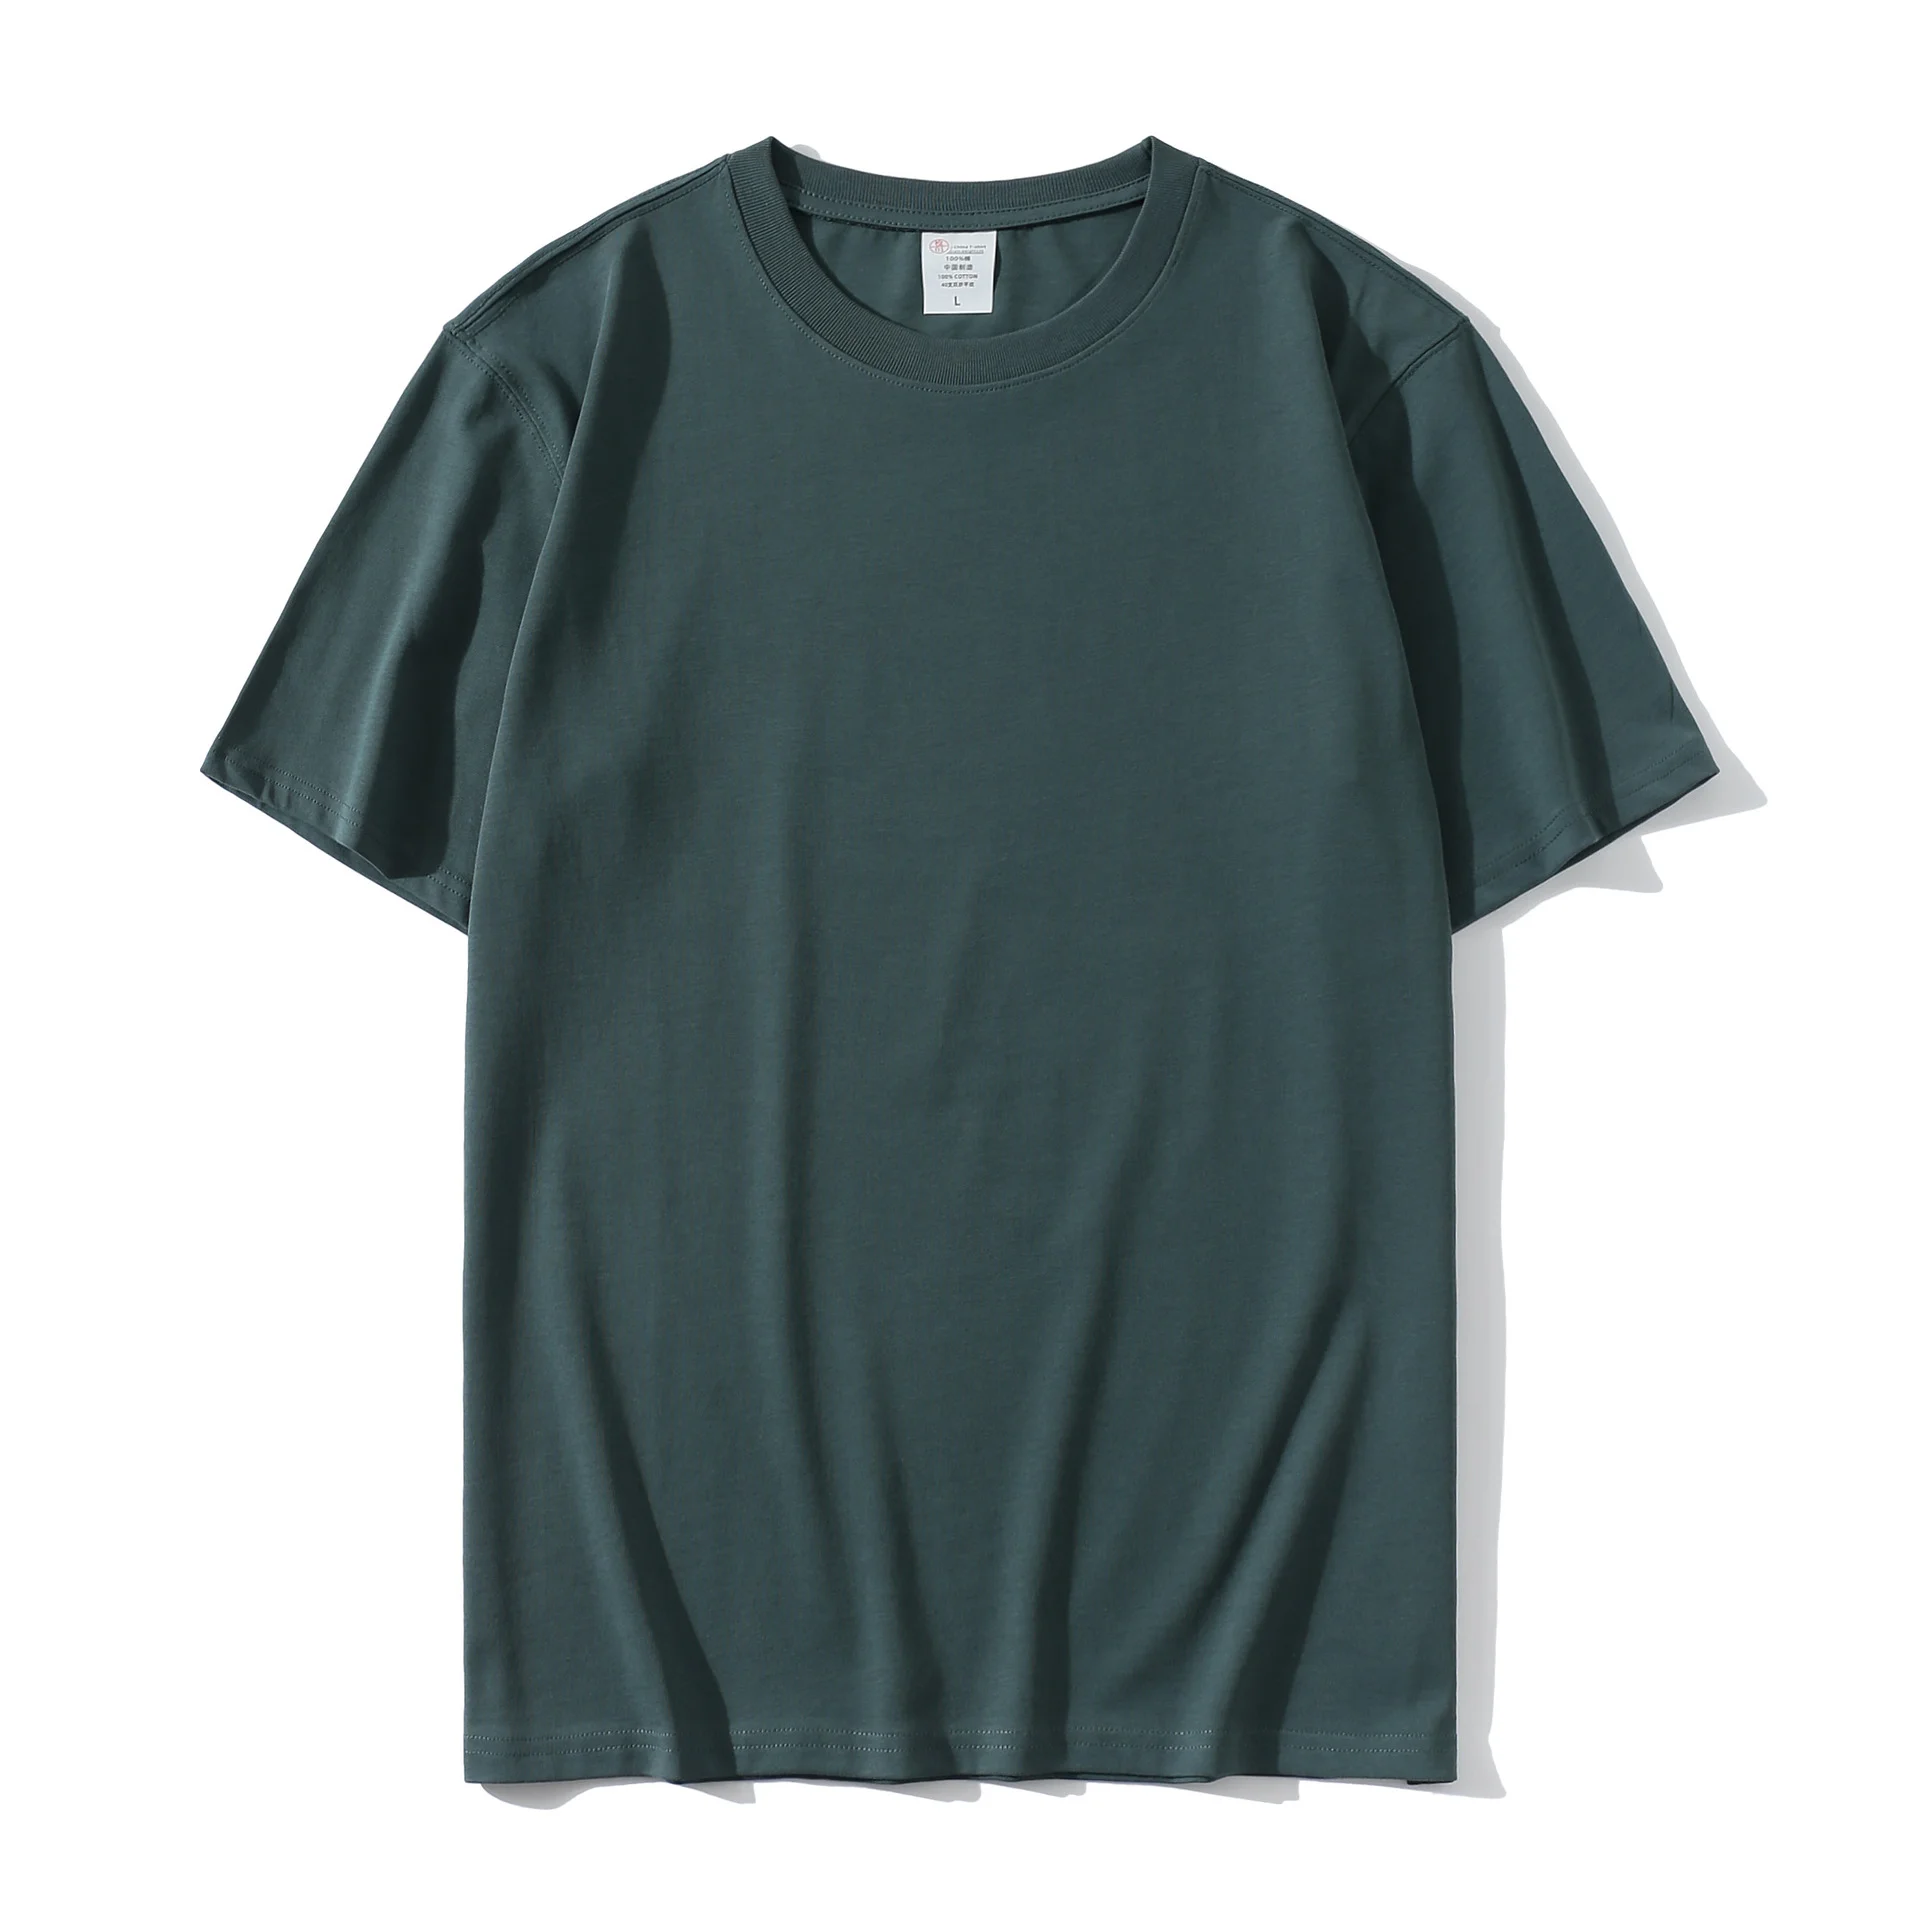 blank t-shirts with no brand - Bangladesh Factory, Suppliers, Manufacturers